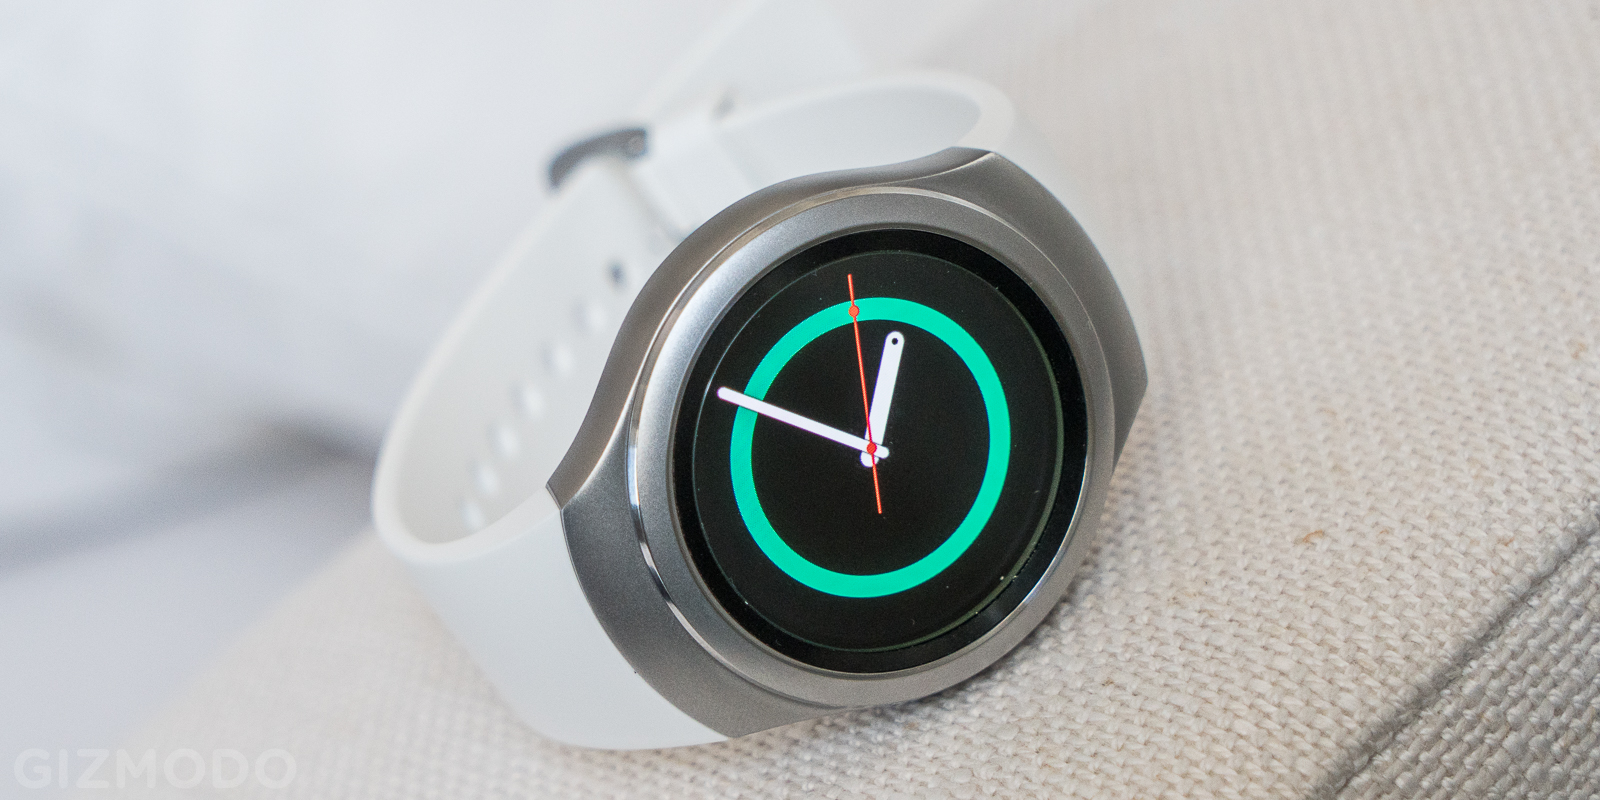 The Gear S2 Smartwatch Is A Good Idea, Racked With OS Growing Pains